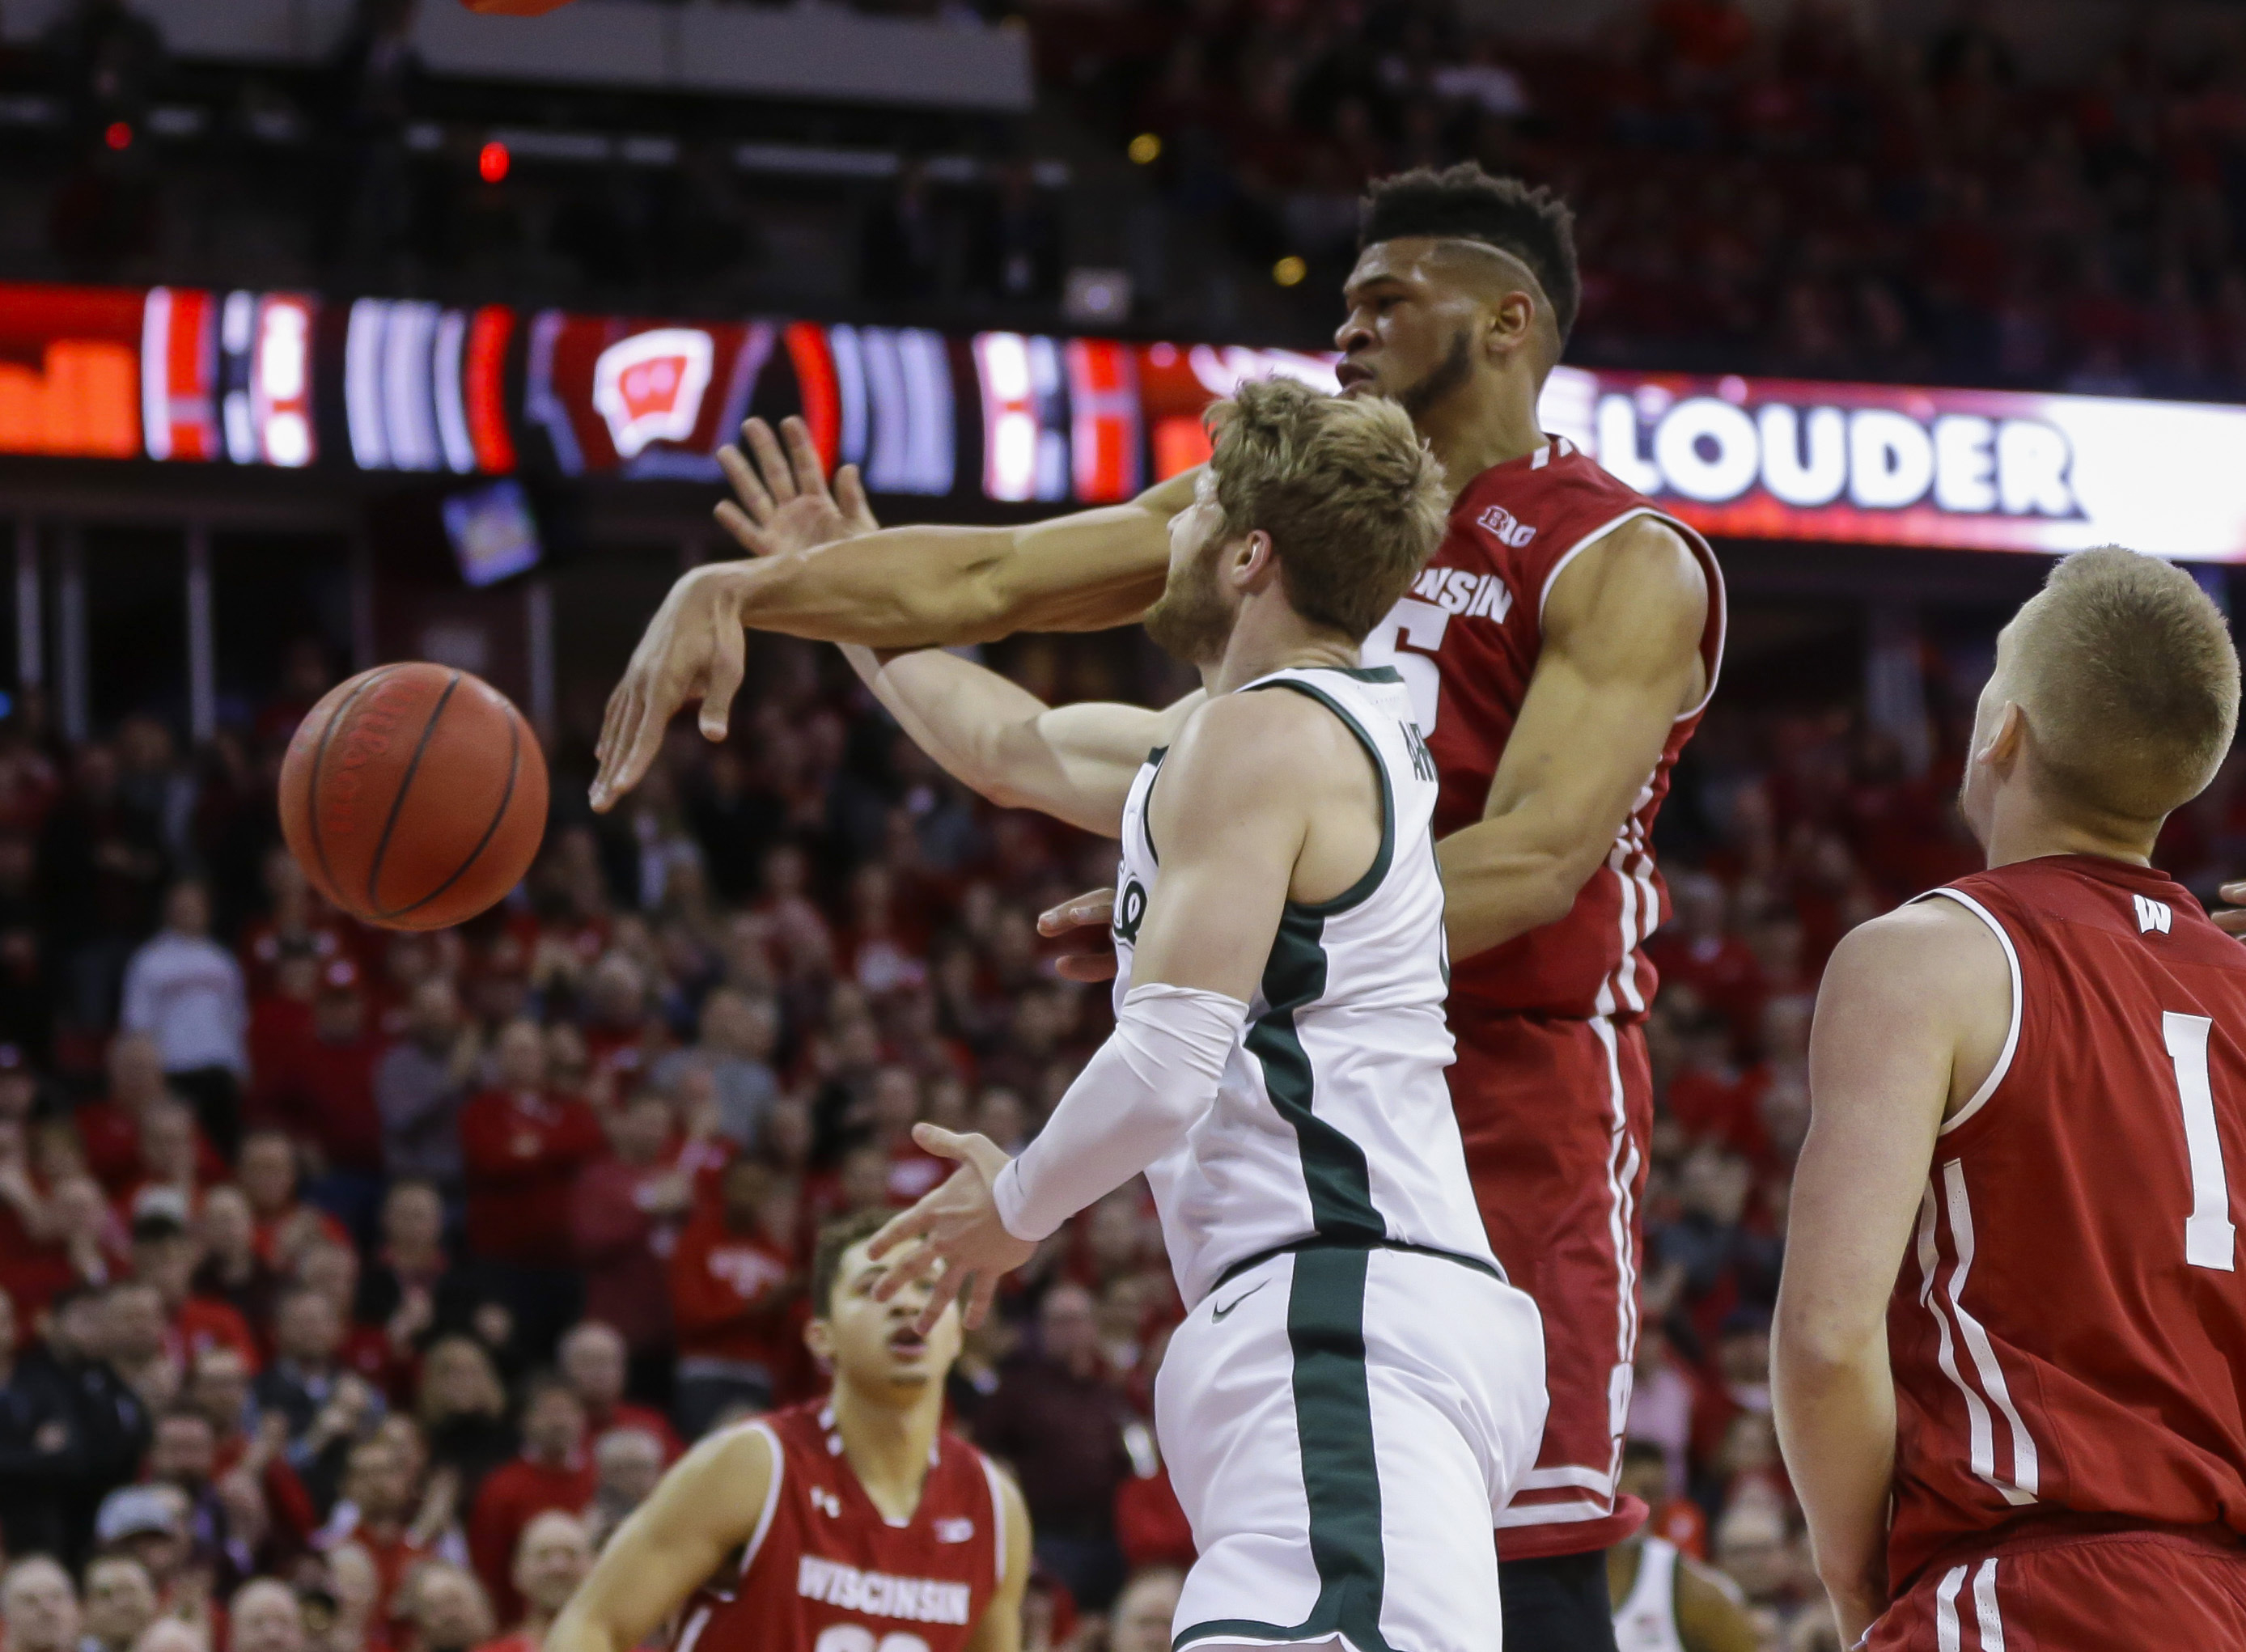 2776x2042 Michigan State Spartans at Wisconsin Badgers News February 12, 2019 | FOX Sports